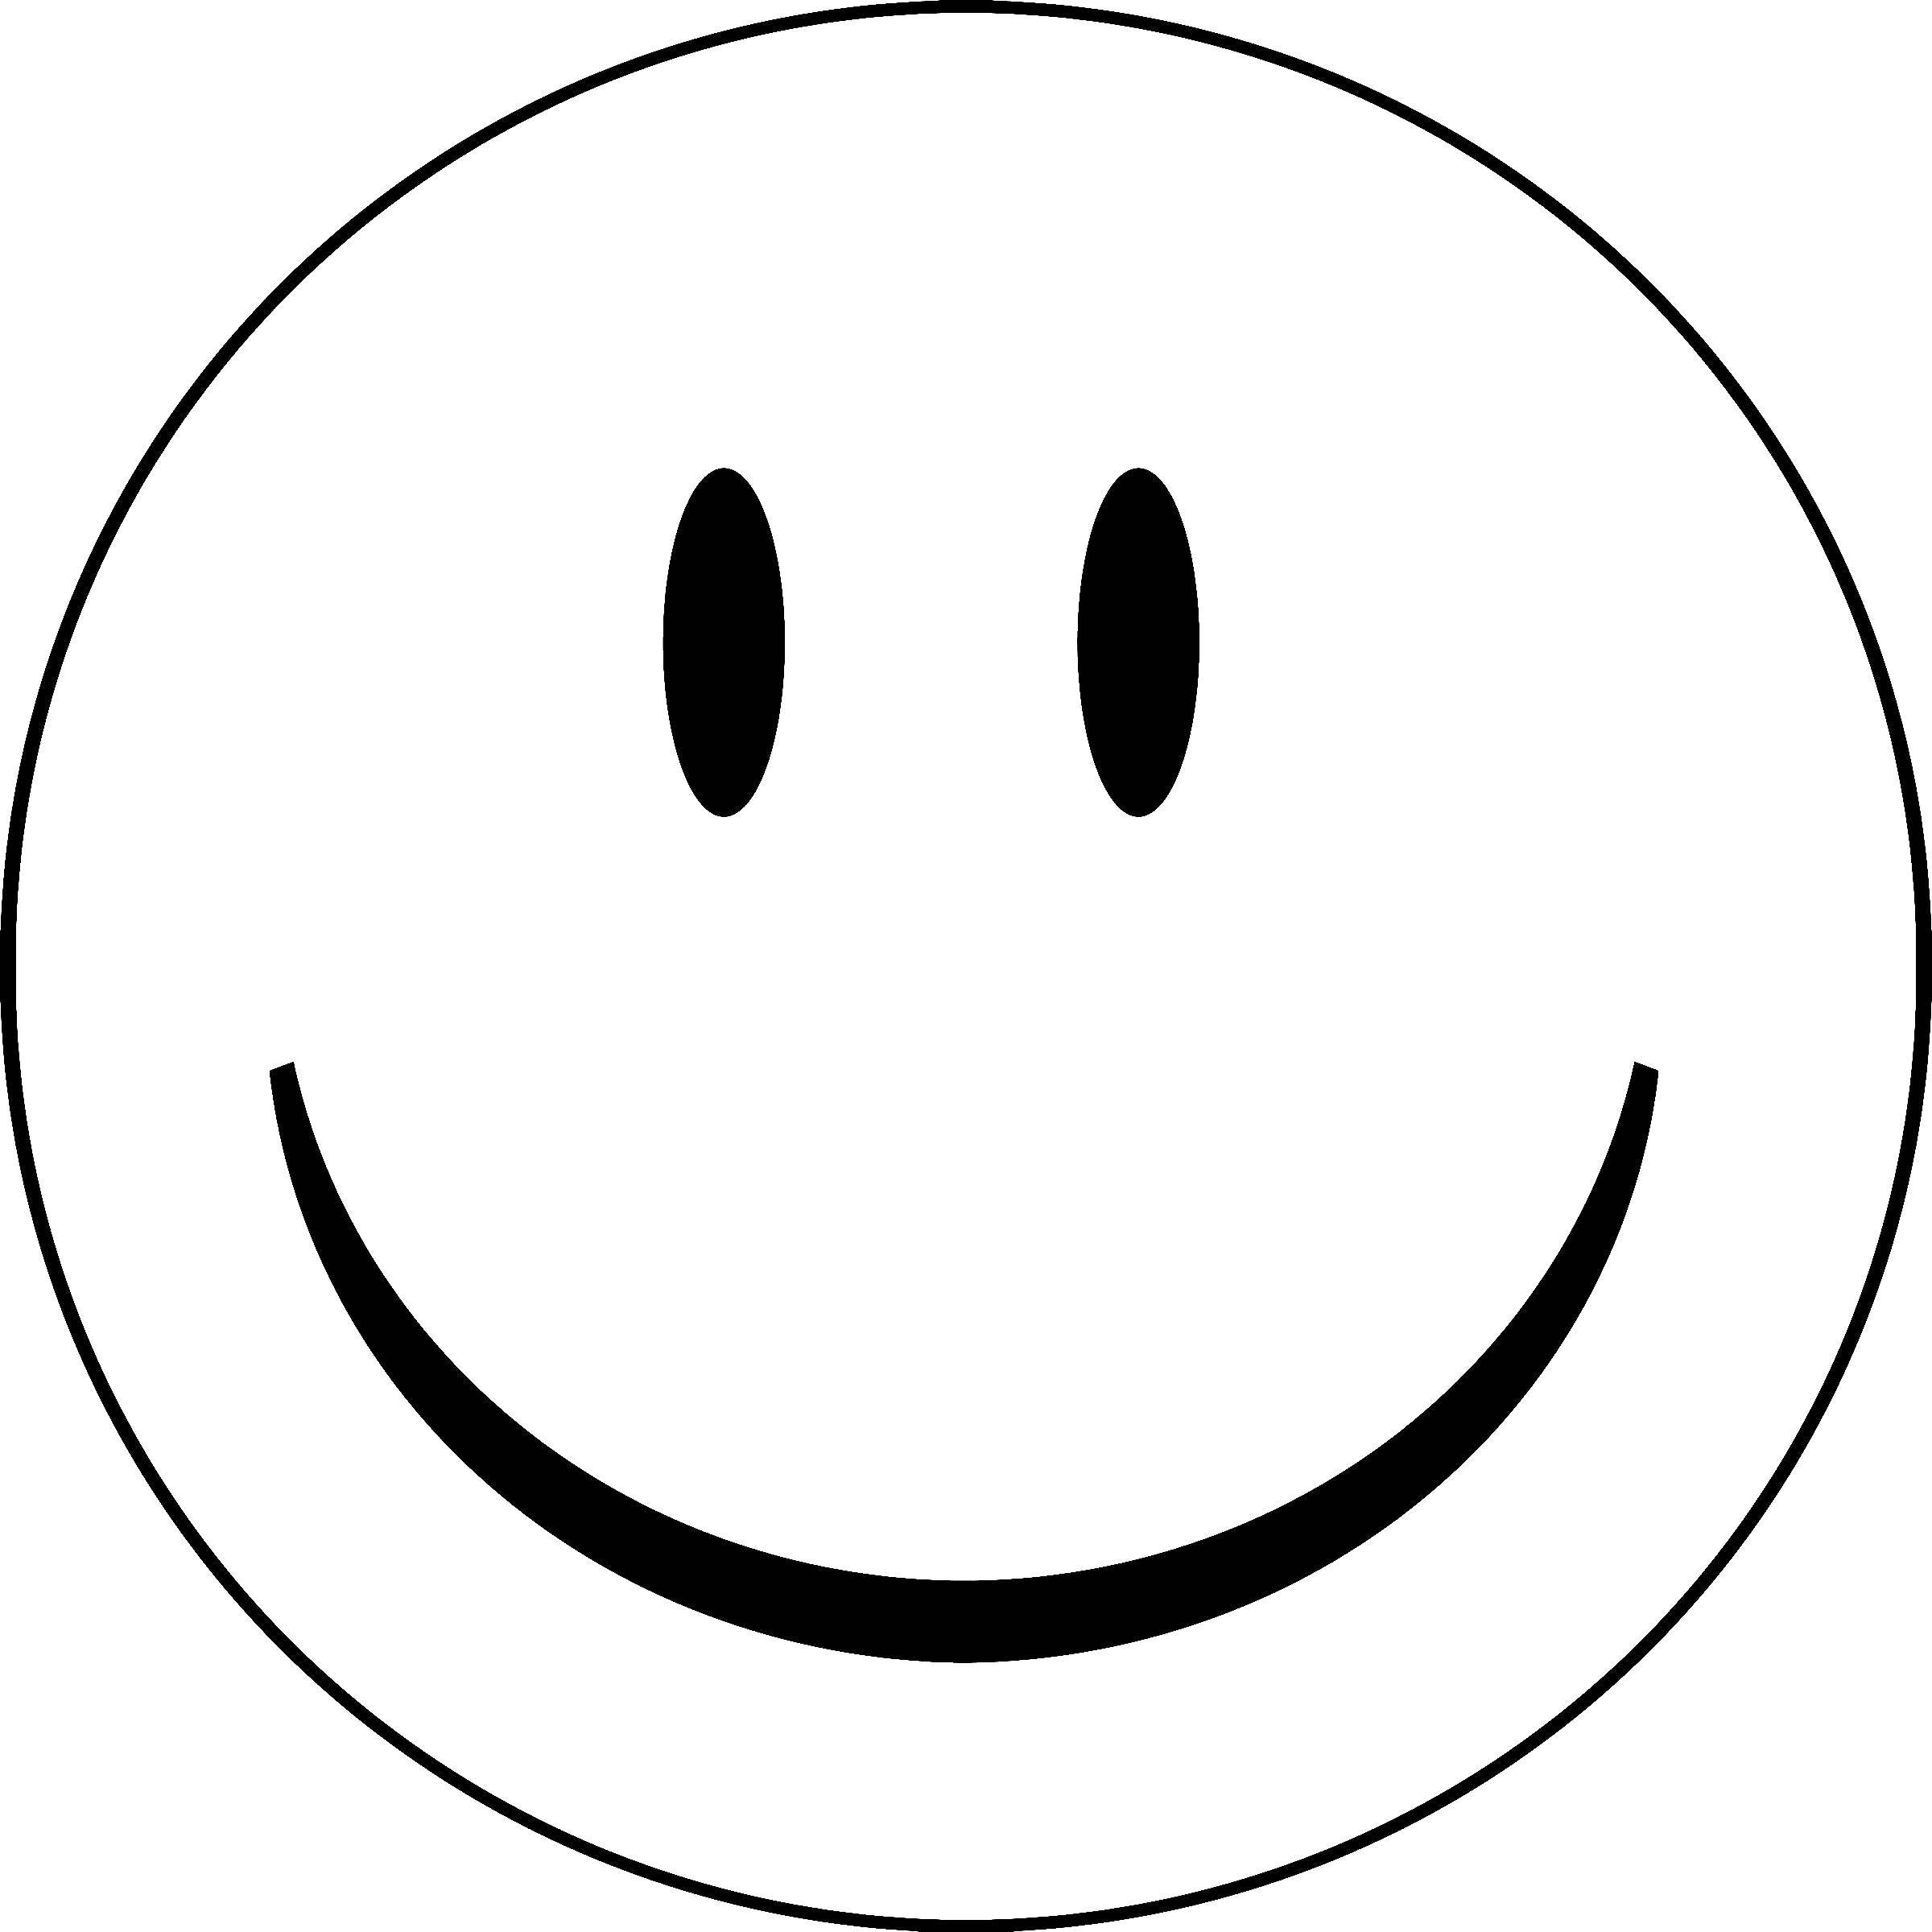 Coloring The smiley face with a smile. Category emoticons. Tags:  Emoticon, emotion.